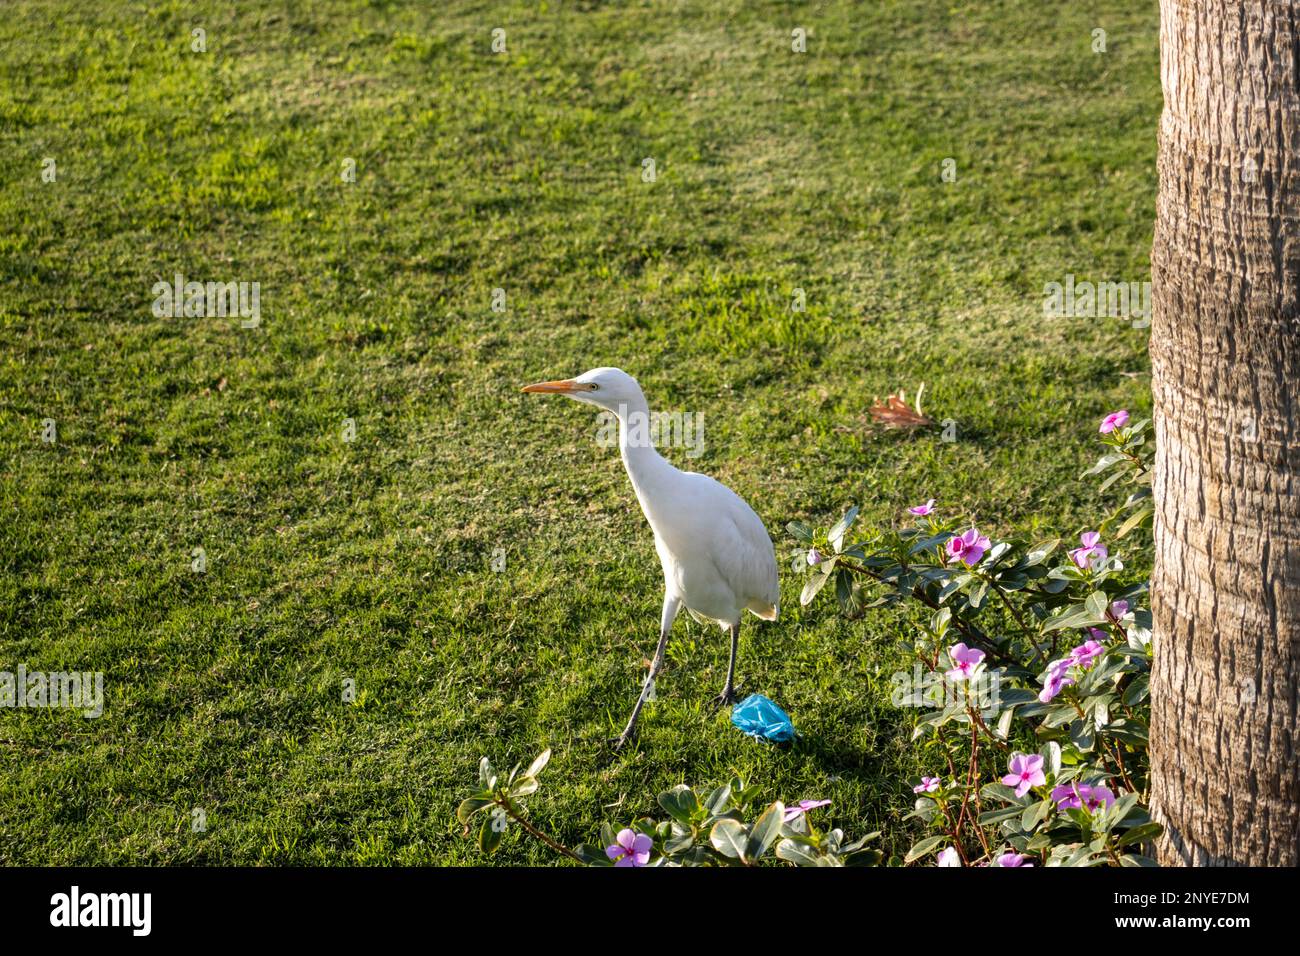 a Cattle Egret (Bubulcus ibis) on a background of green lawn grass and garden flowers Stock Photo